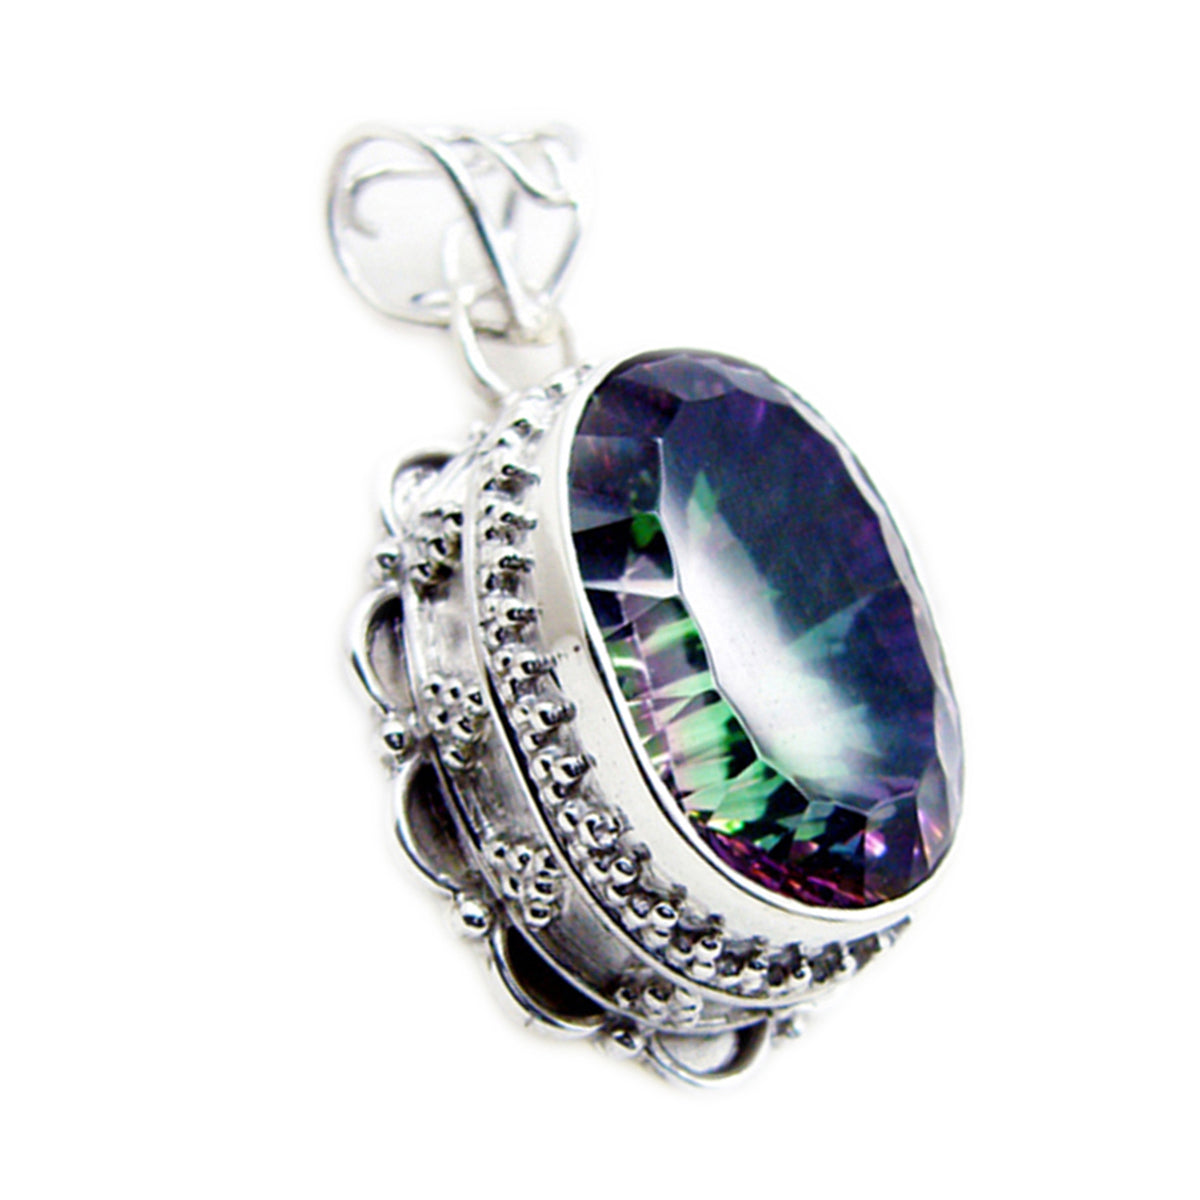 Riyo Winsome Gemstone Oval Faceted Multi Color Mystic Quartz Sterling Silver Pendant Gift For Handmade